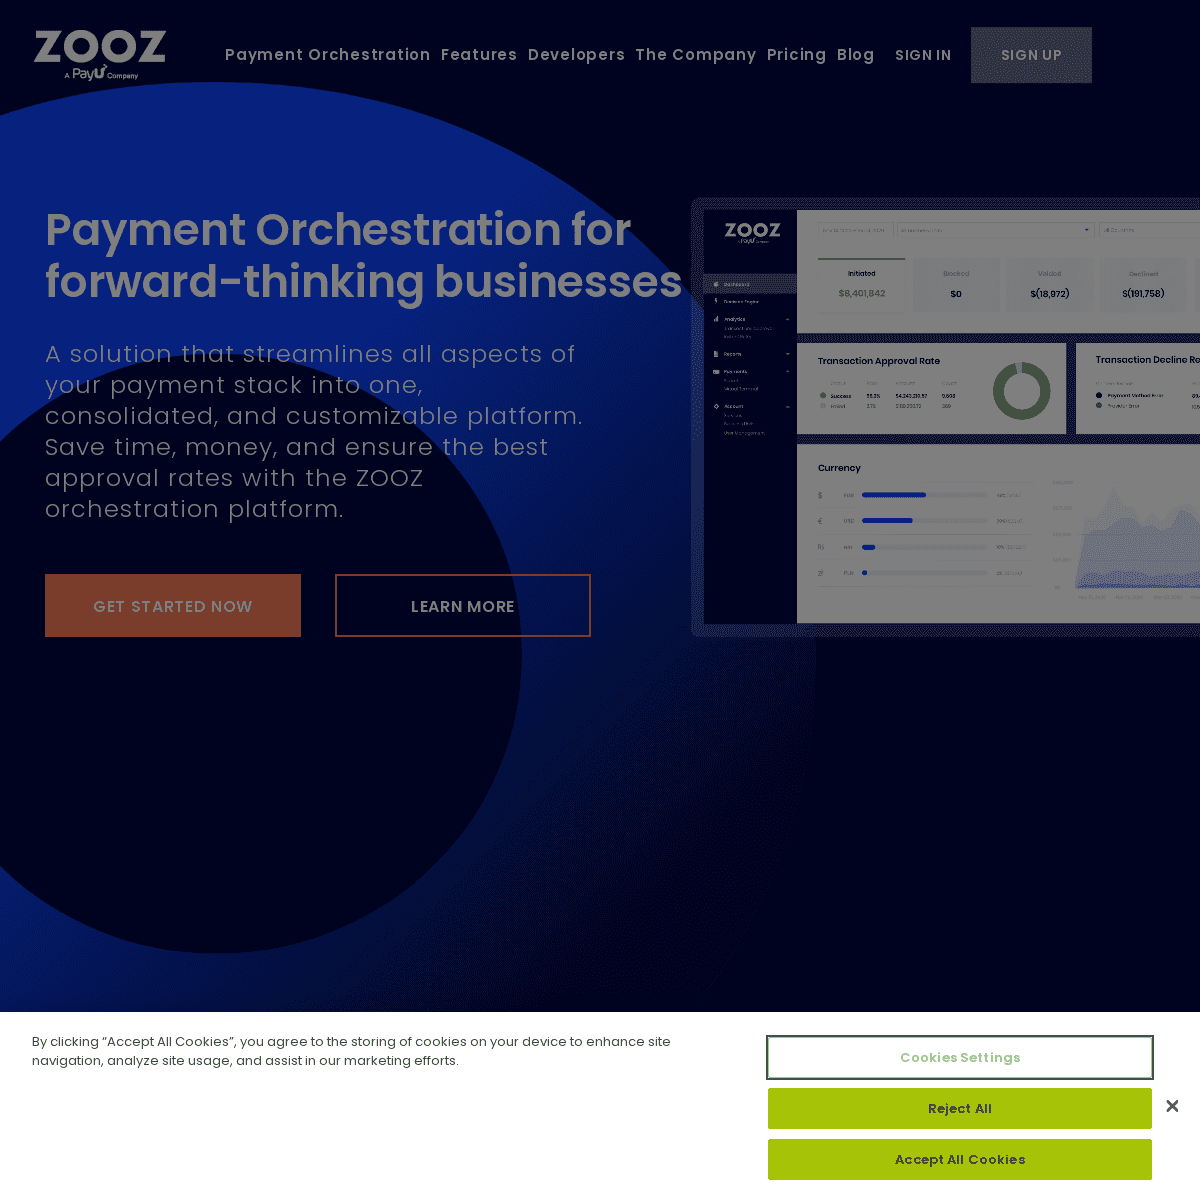 A complete backup of https://zooz.com